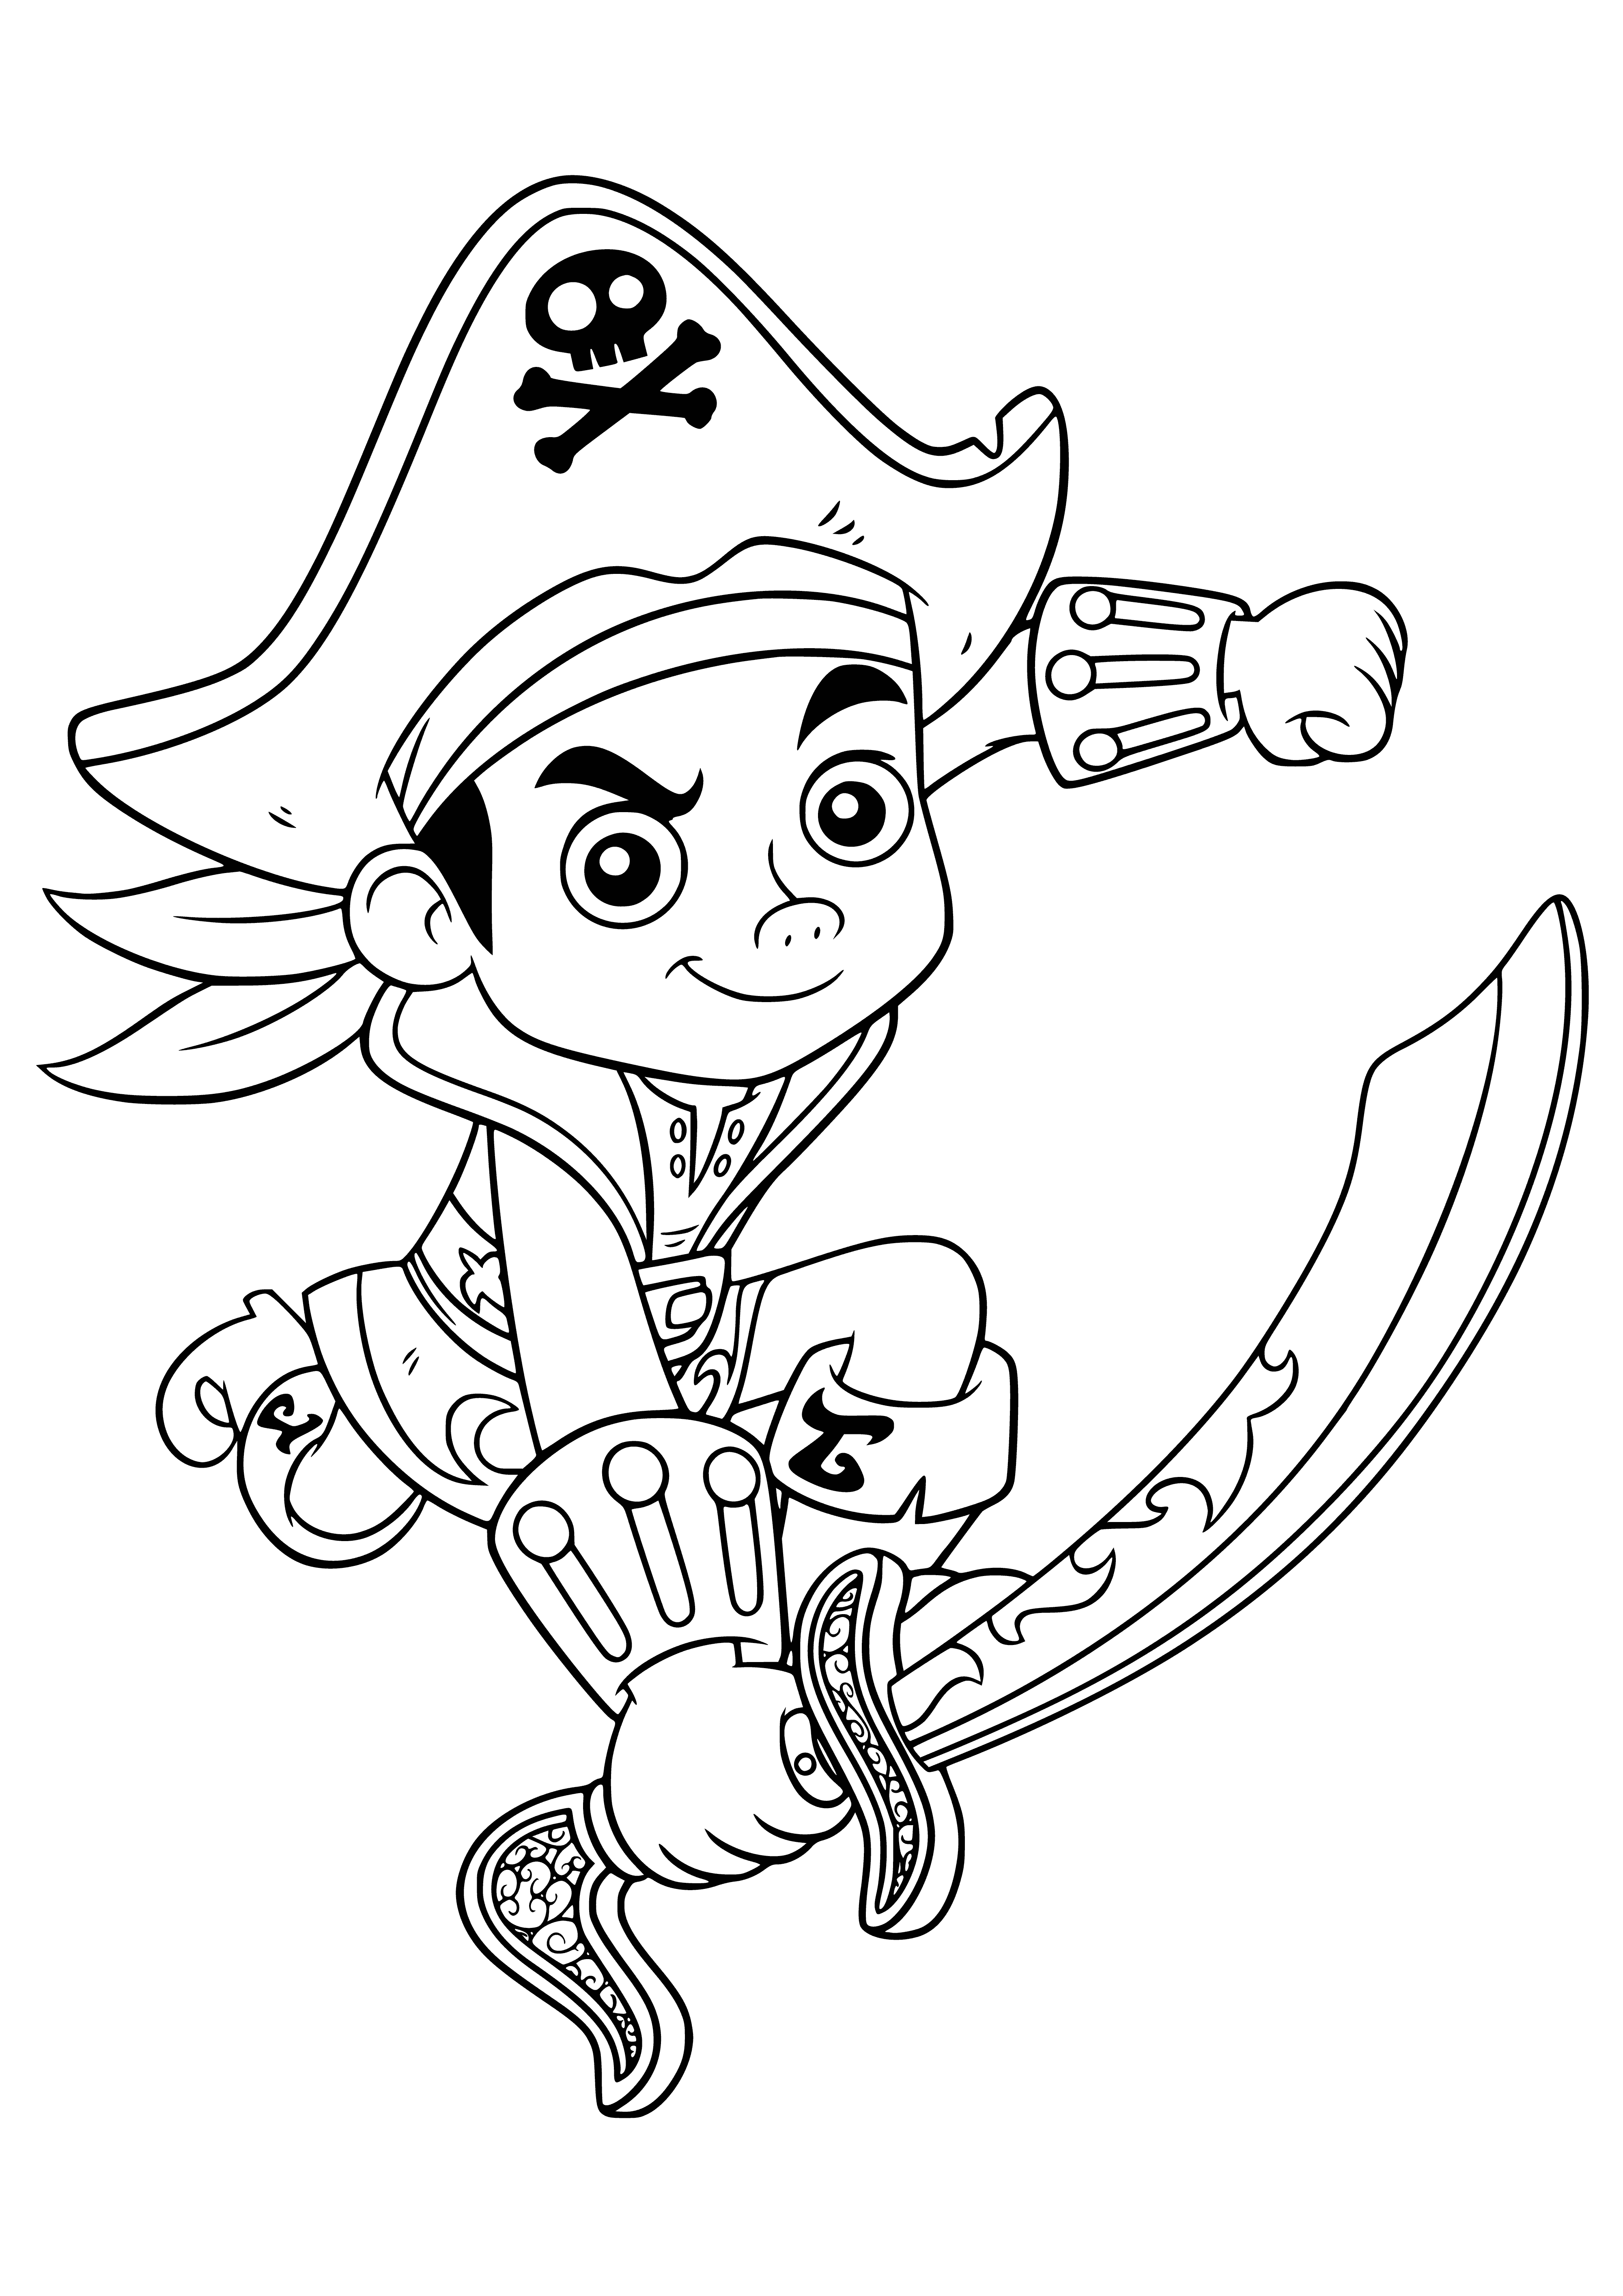 Jake with a saber coloring page